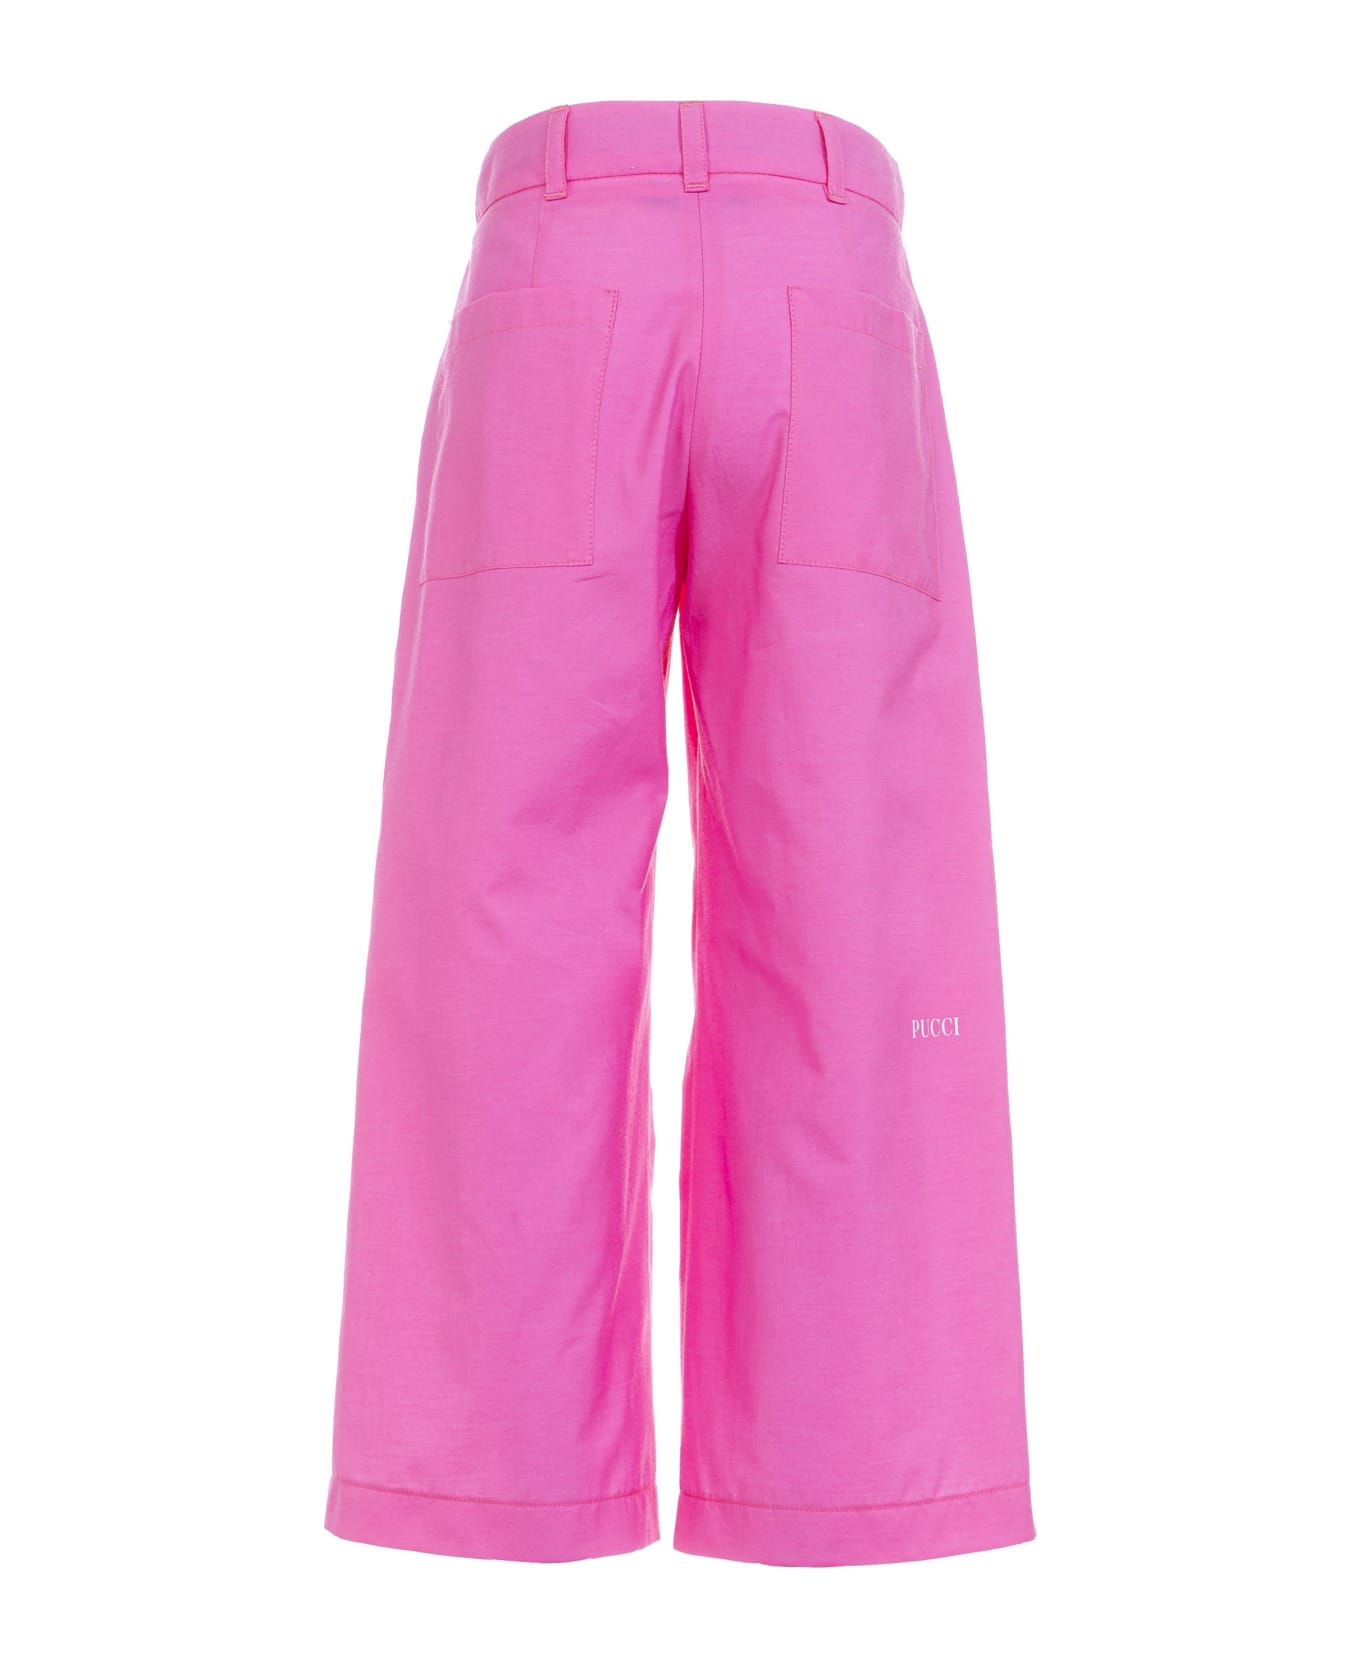 Pucci High Waisted Trousers - Fucsia ボトムス